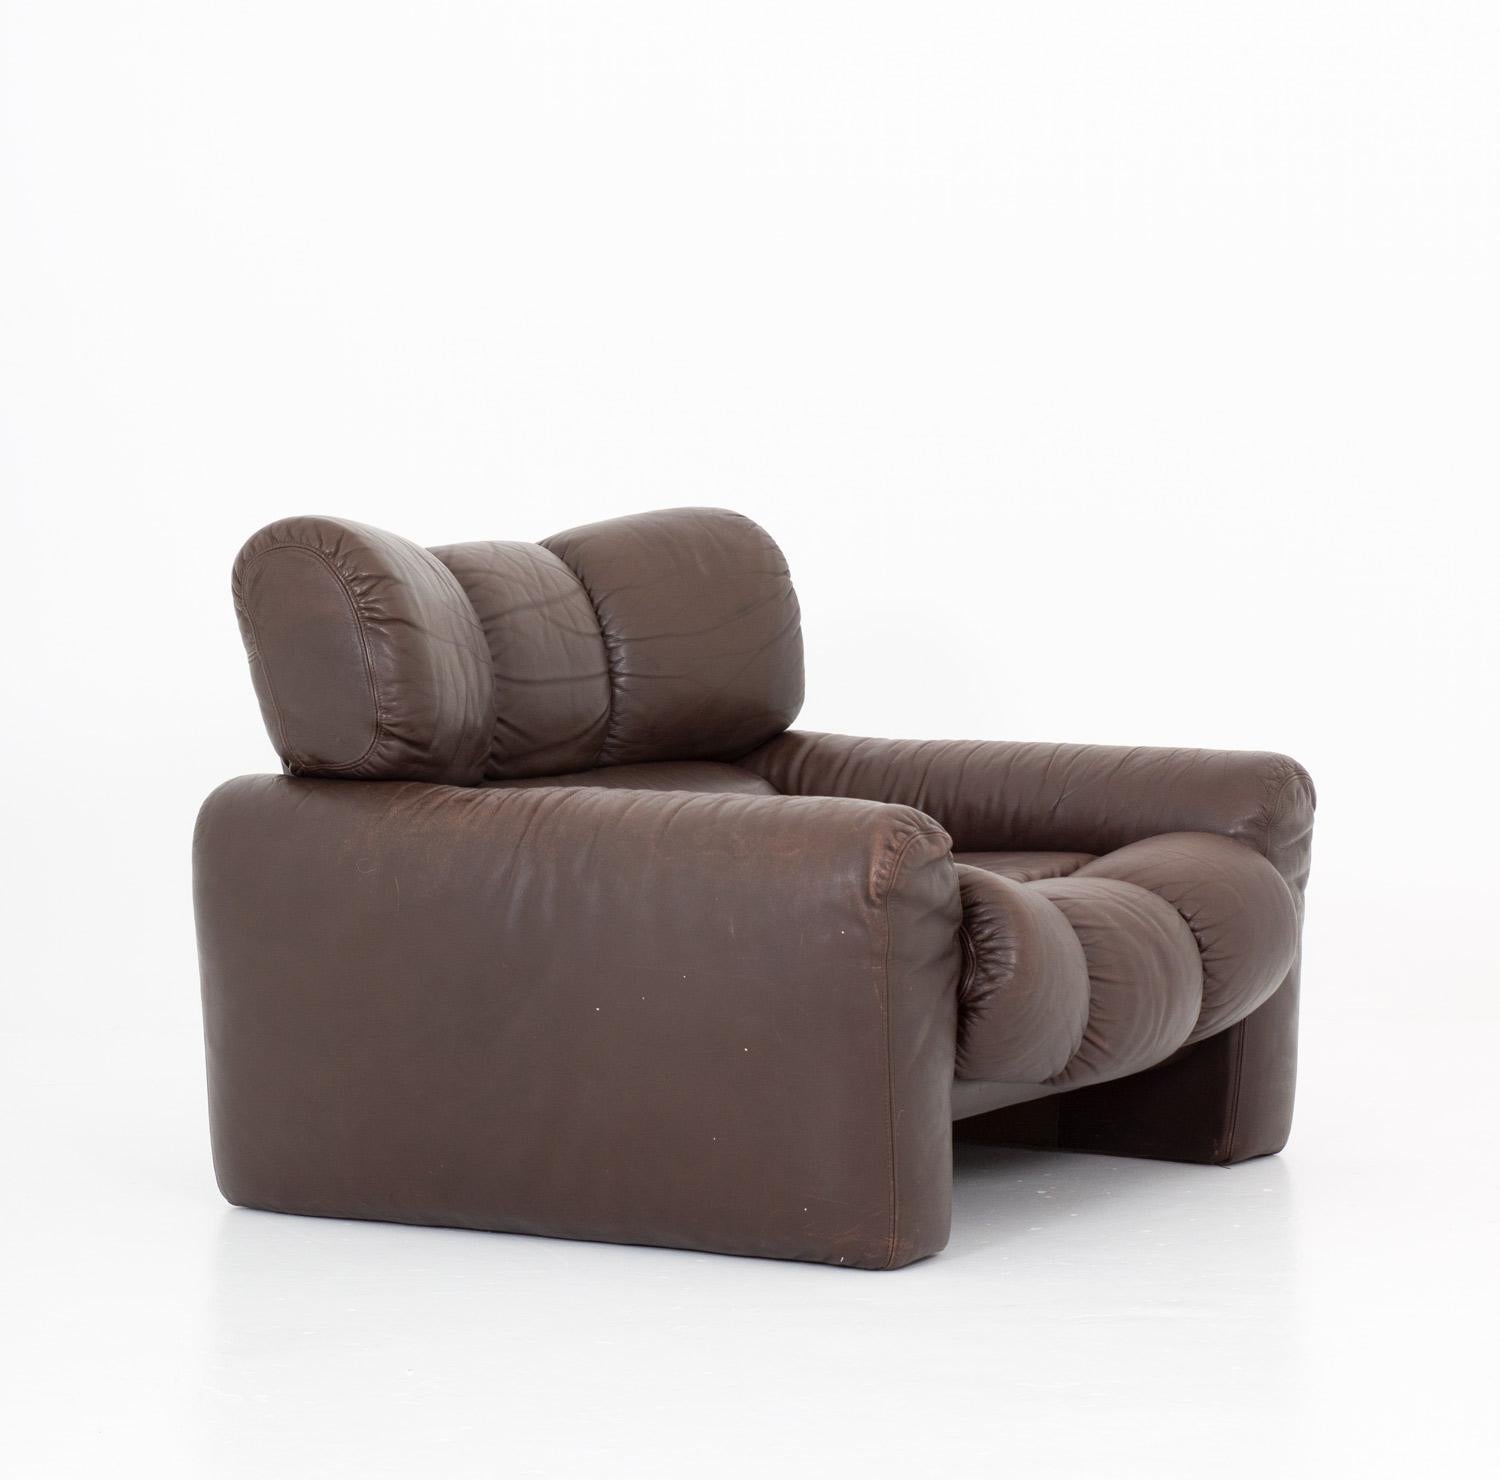 Rare lounge chair designed by by Tongiani Stefanos for Elleduemila, manufactured on license by Ikea, 1973.
This chair is upholstered in brown leather and is constructed with a high sense of quality and design. 

Condition: Very good original